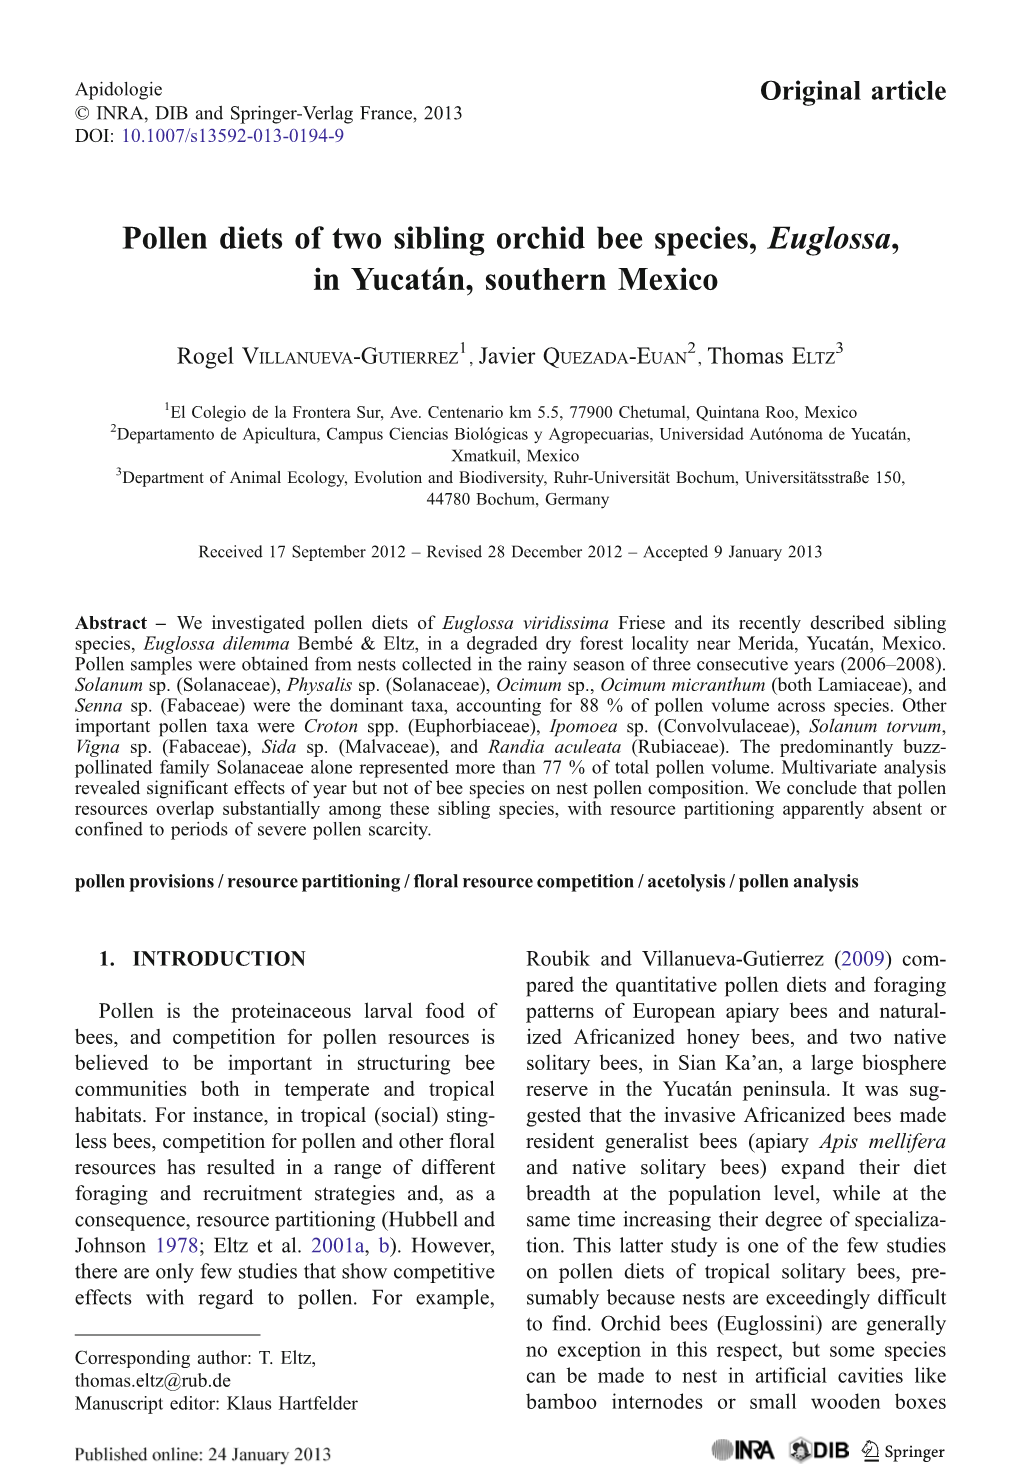 Pollen Diets of Two Sibling Orchid Bee Species, Euglossa, in Yucatán, Southern Mexico